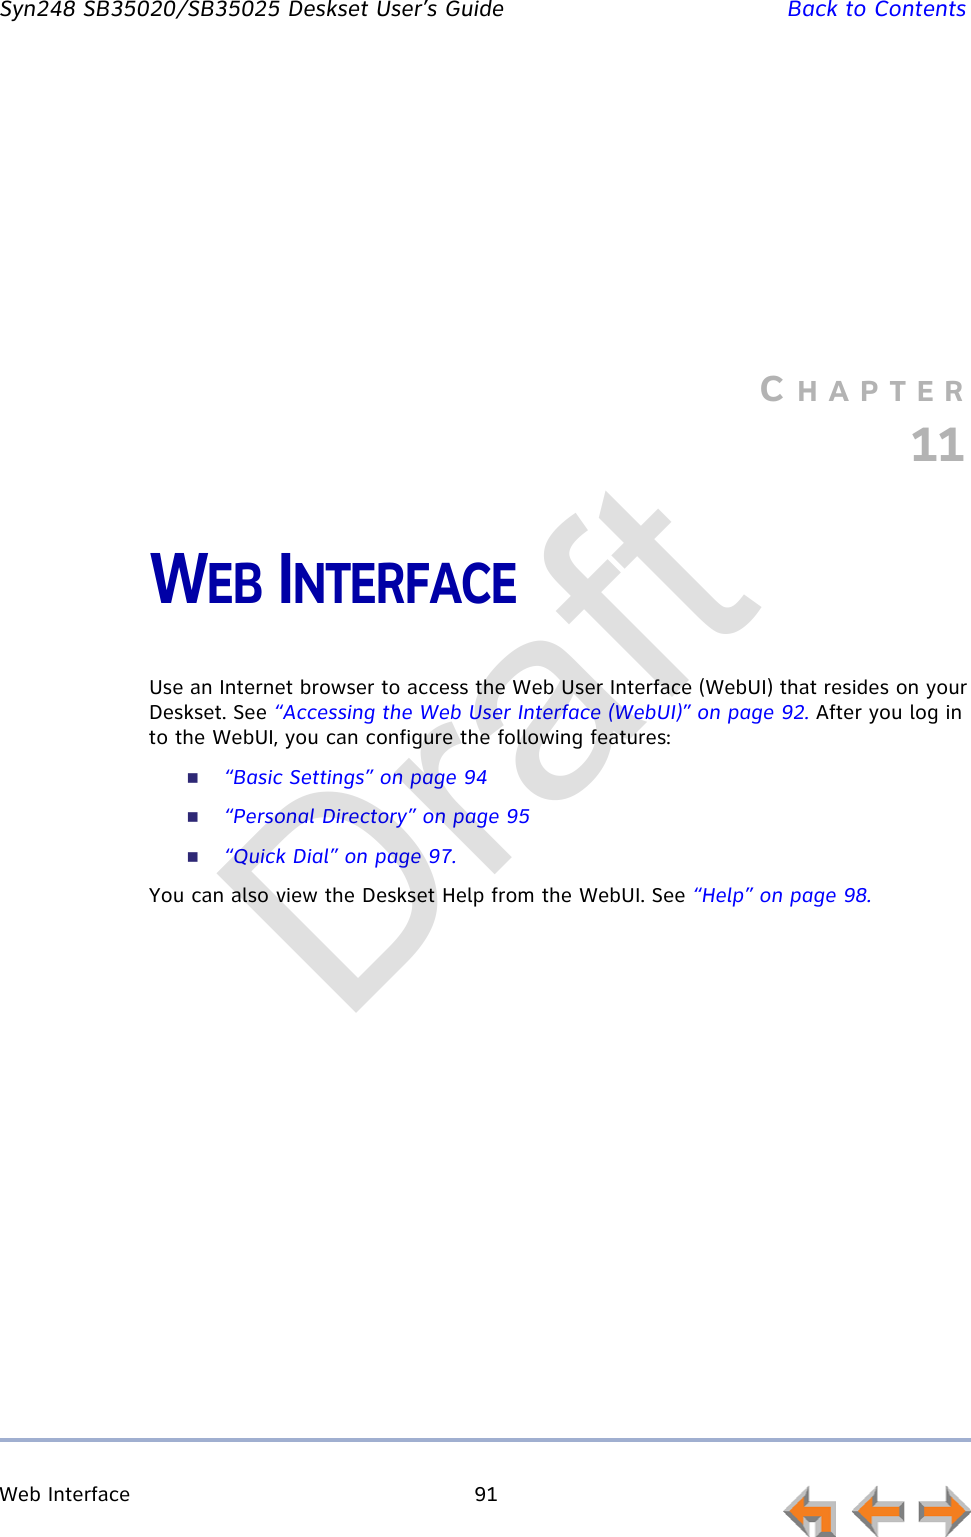 Web Interface 91         Syn248 SB35020/SB35025 Deskset User’s Guide Back to ContentsCHAPTER11WEB INTERFACEUse an Internet browser to access the Web User Interface (WebUI) that resides on your Deskset. See “Accessing the Web User Interface (WebUI)” on page 92. After you log in to the WebUI, you can configure the following features:“Basic Settings” on page 94“Personal Directory” on page 95“Quick Dial” on page 97.You can also view the Deskset Help from the WebUI. See “Help” on page 98.Draft